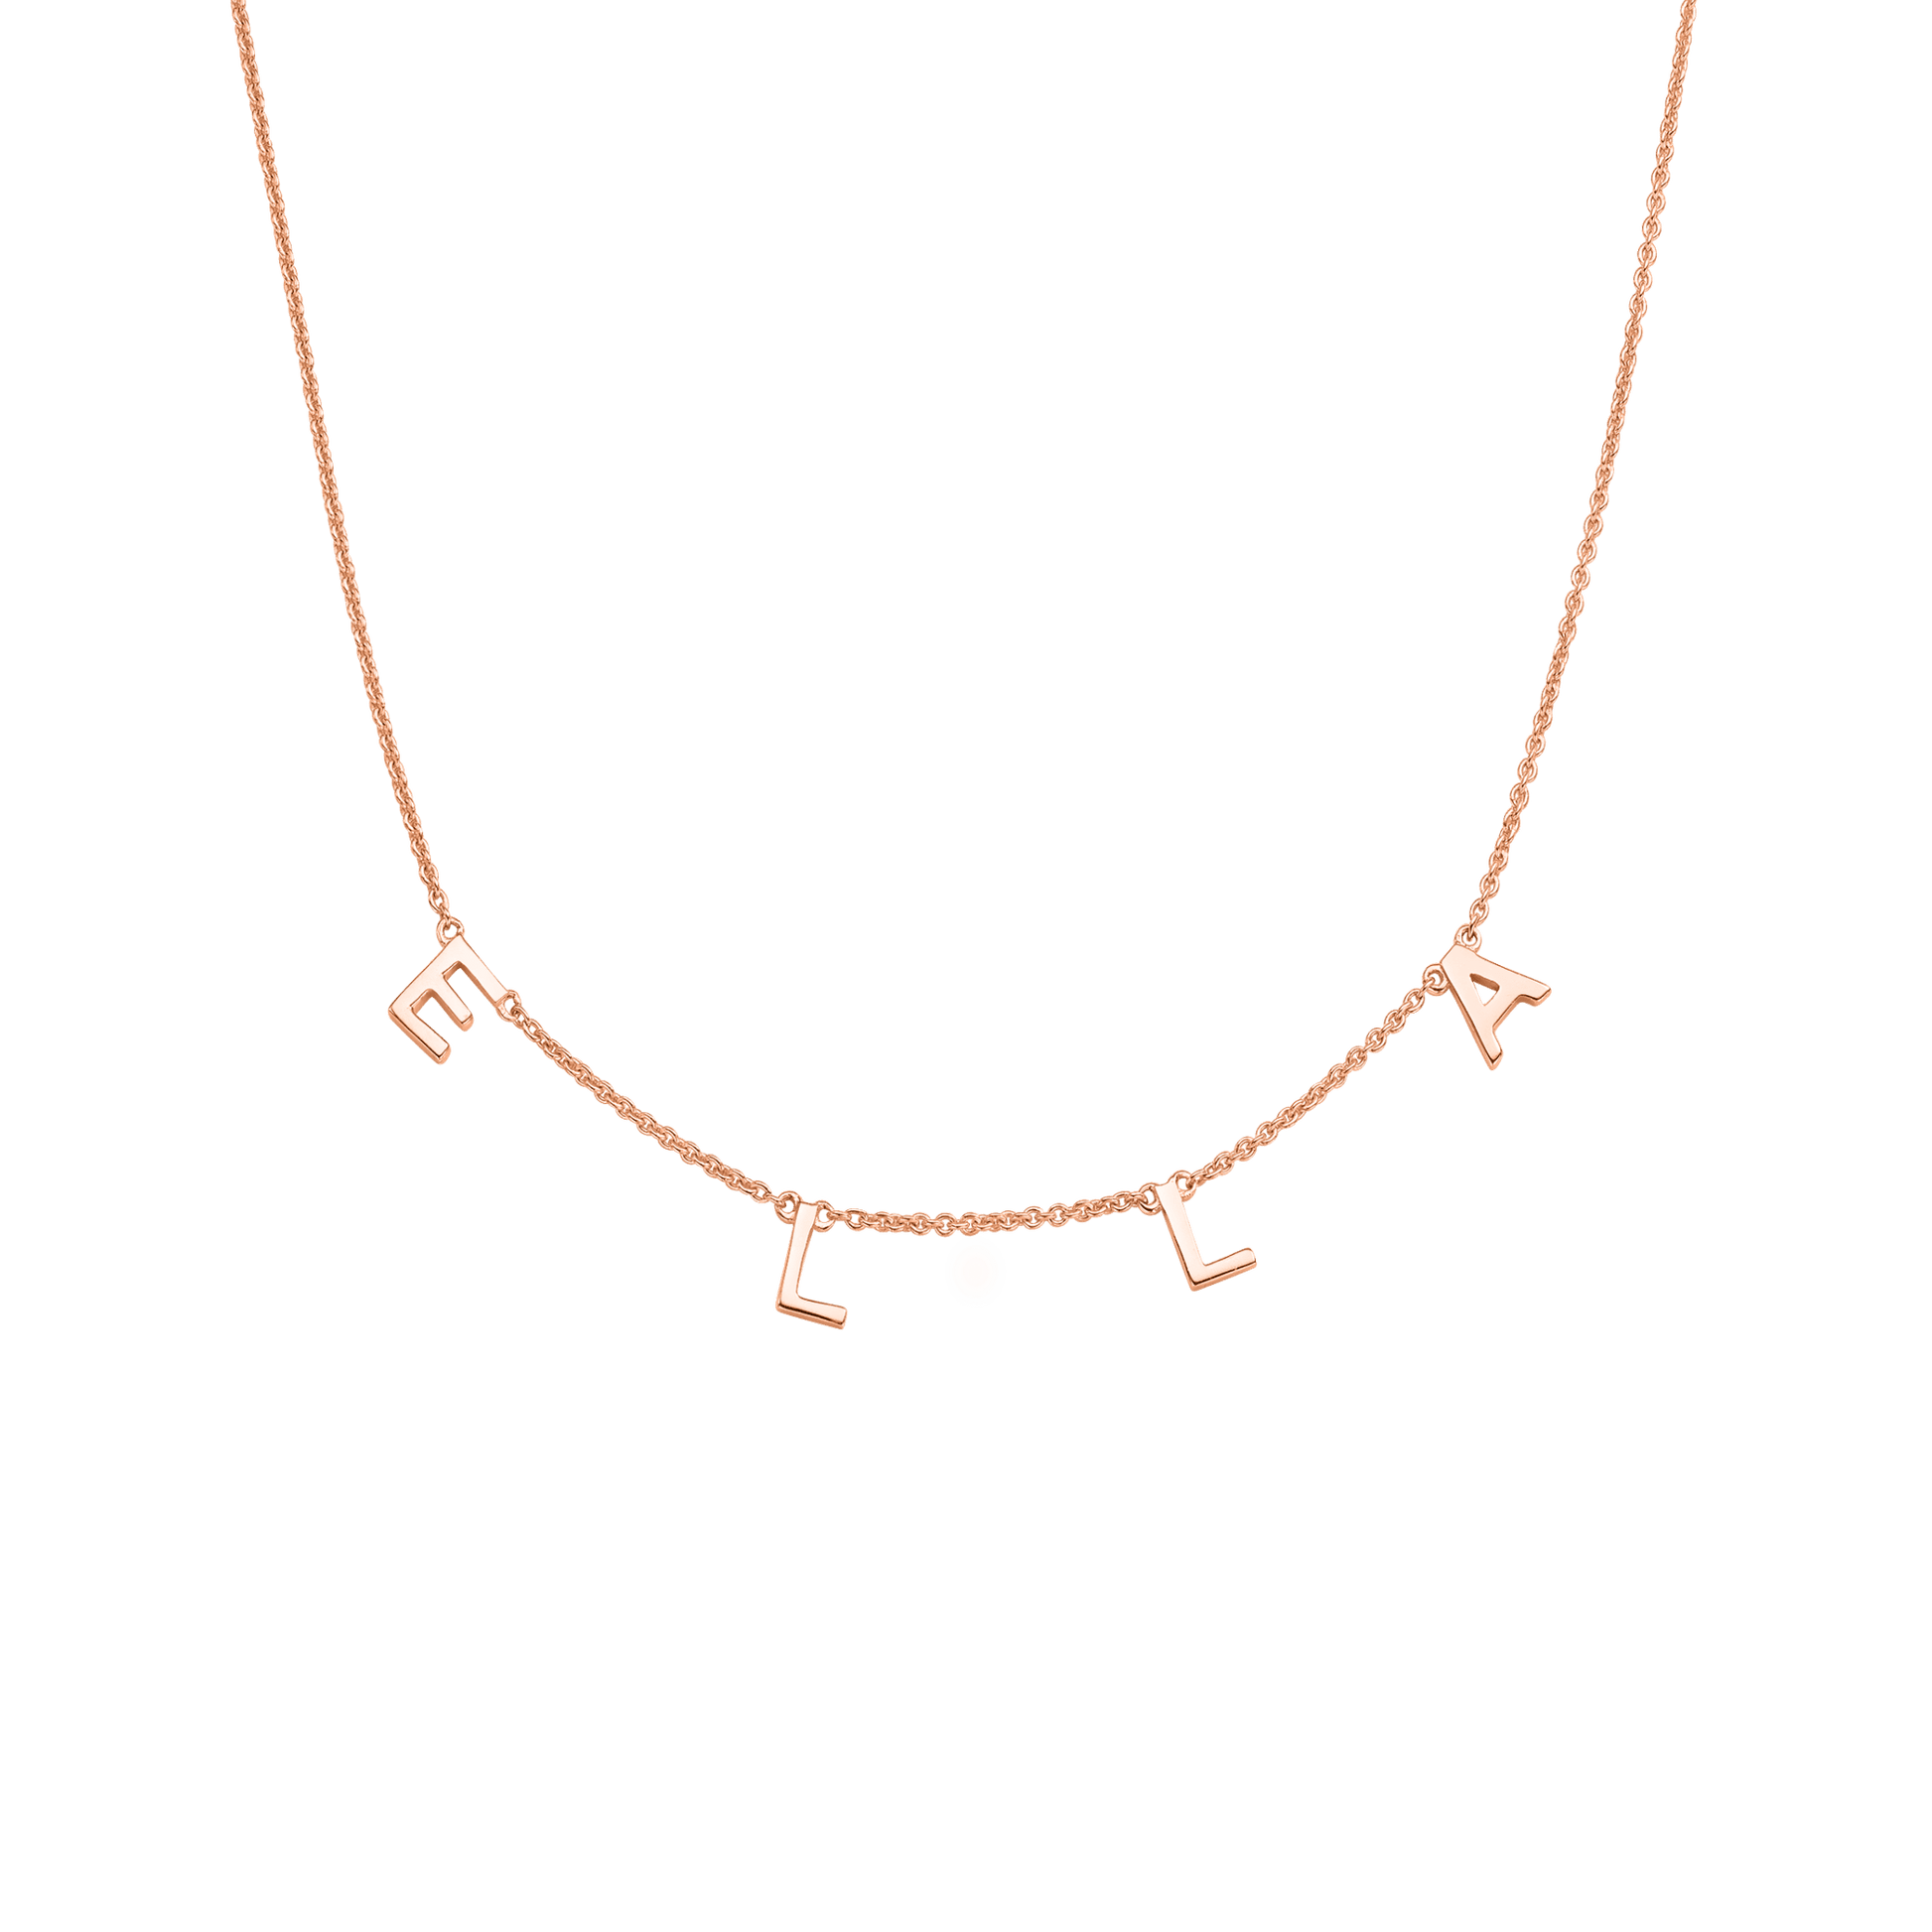 Name Necklace - 14K Yellow Gold Necklaces magal-dev 